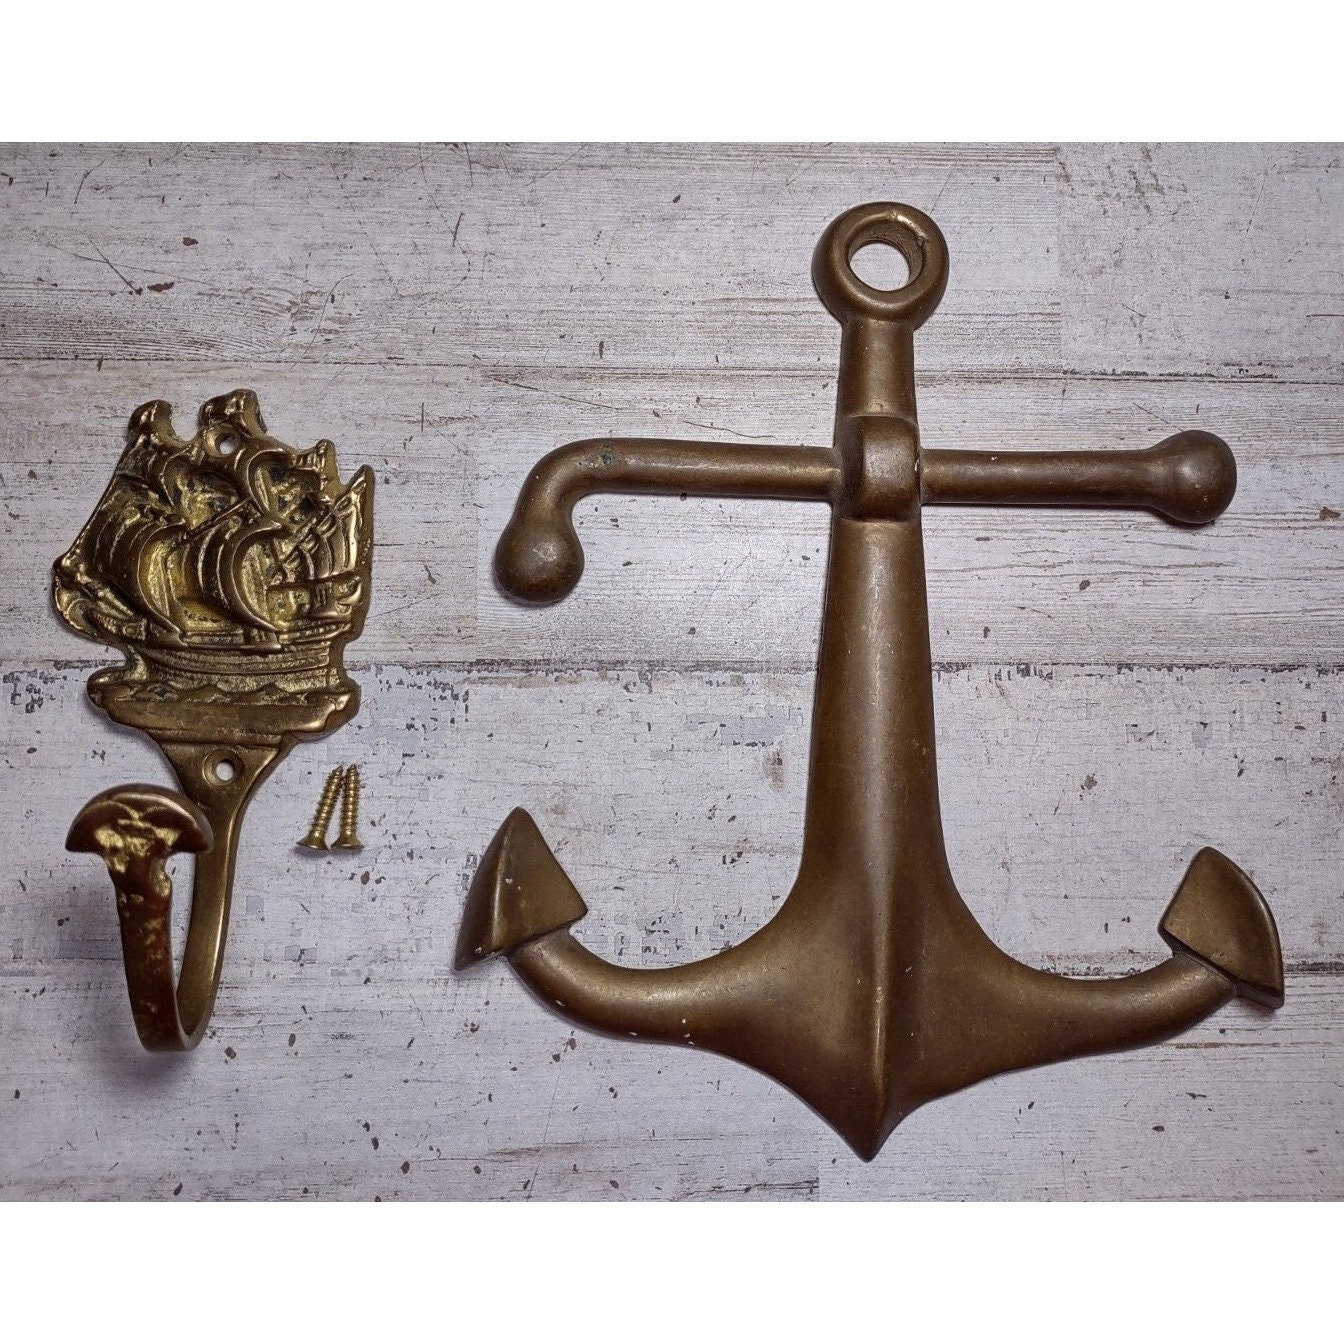 Marine Boat Hook Head - Brass - Boathook - Size 9 Inches - Nautical -  Maritime from Brass Blessing (5137)